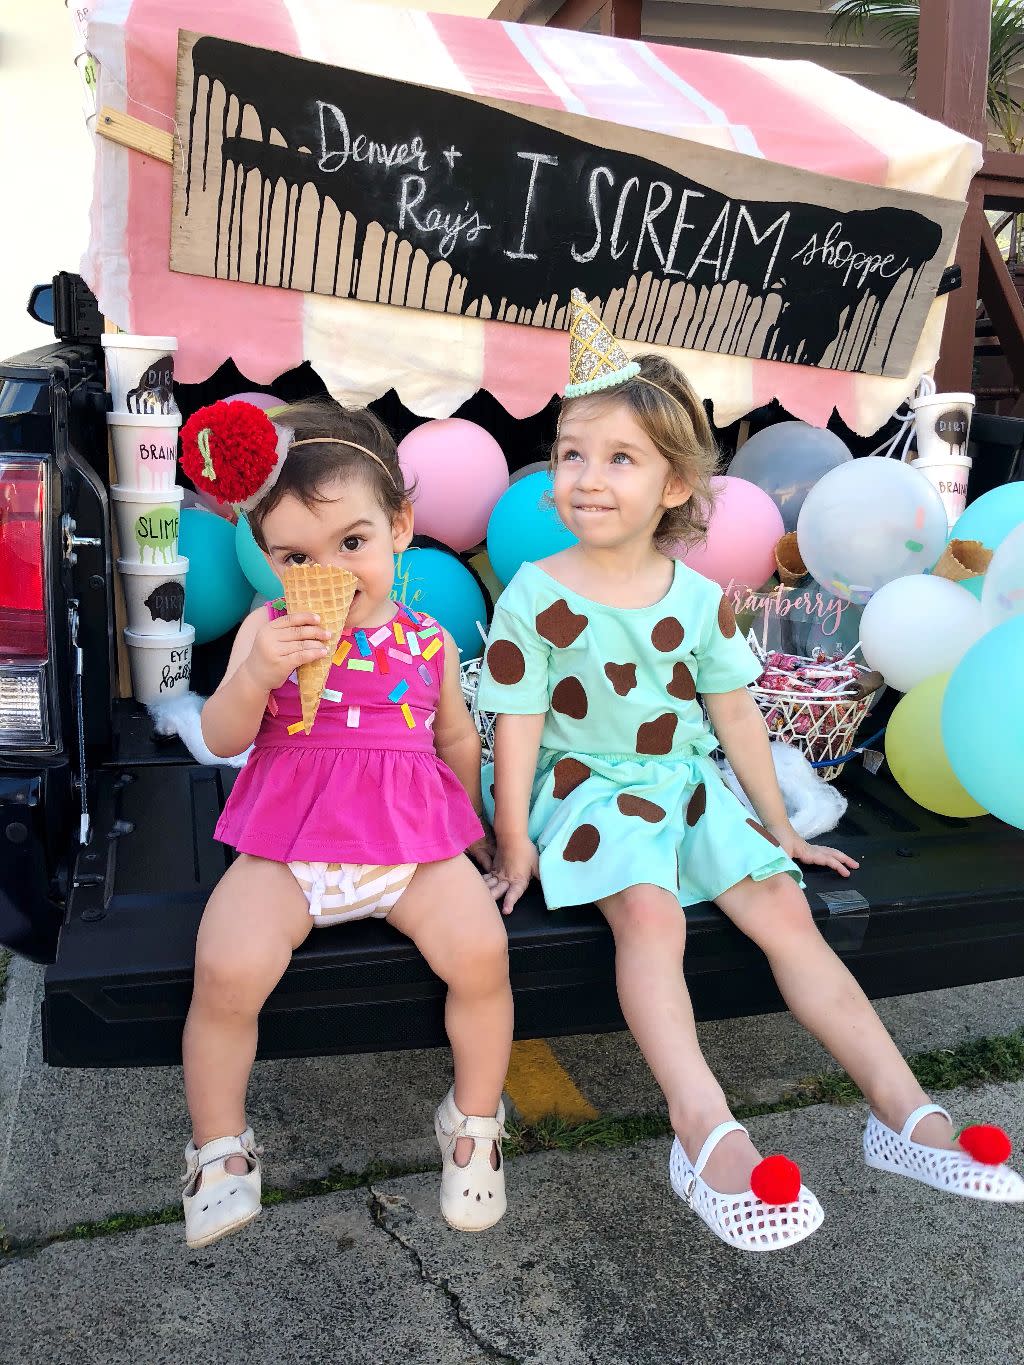 two little girls sitting on tailgate of truck one is wearing a pink dress with colorful sprinkles and eating a waffle cone the other is wearing a mint green dress with brown shapes like chips on it there are pastel colored balloons in the bed, a pink and white awning over it with a banner than reads i scream for ice cream and ice cream pint containers with labels like slime stacked on one another